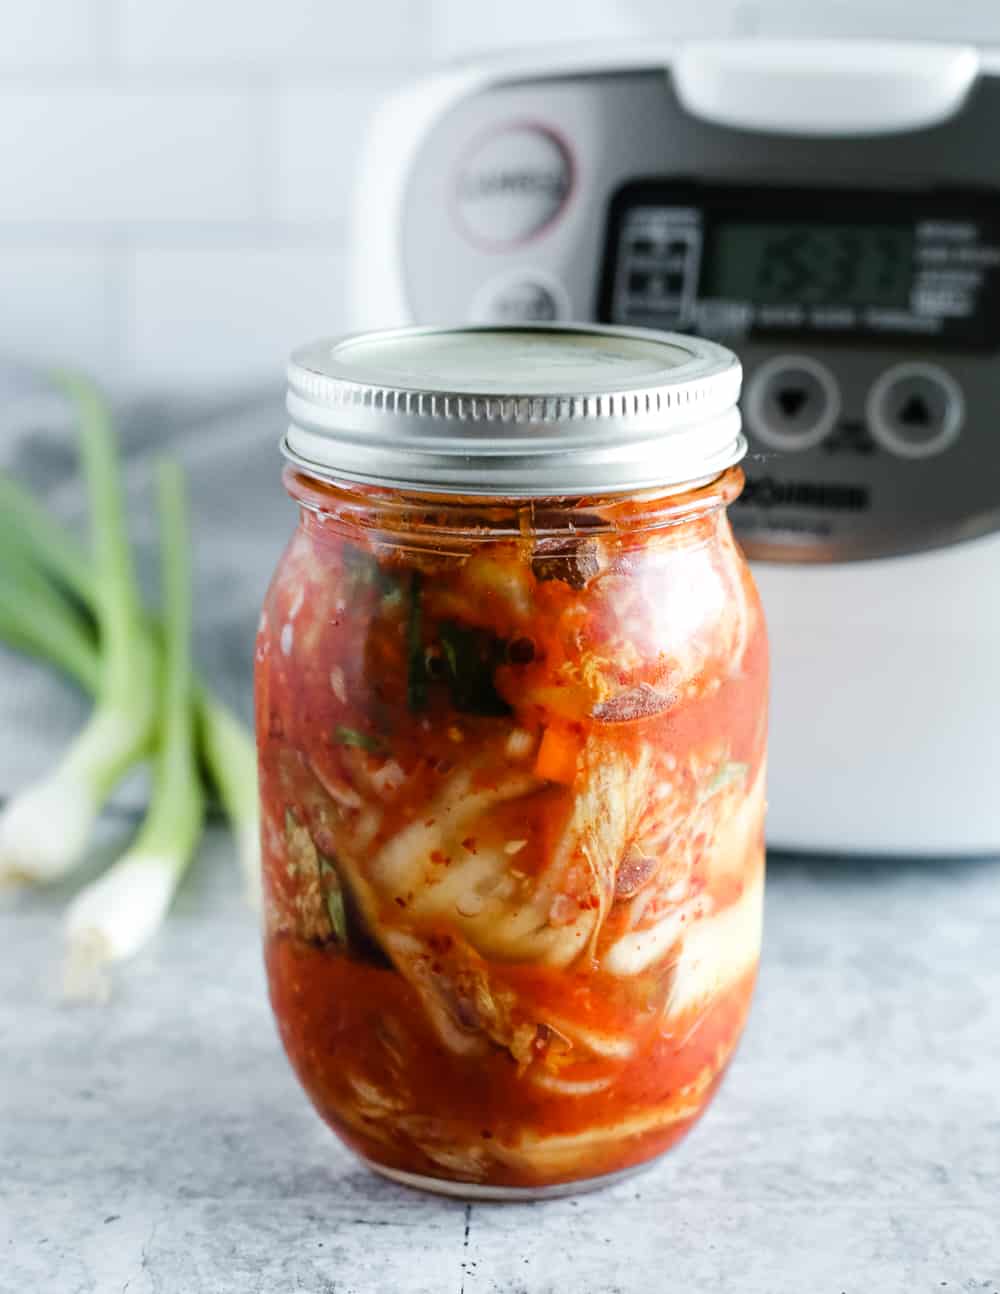 Glass jar of homemade kimchi on kitchen counter in front of a rice cooker